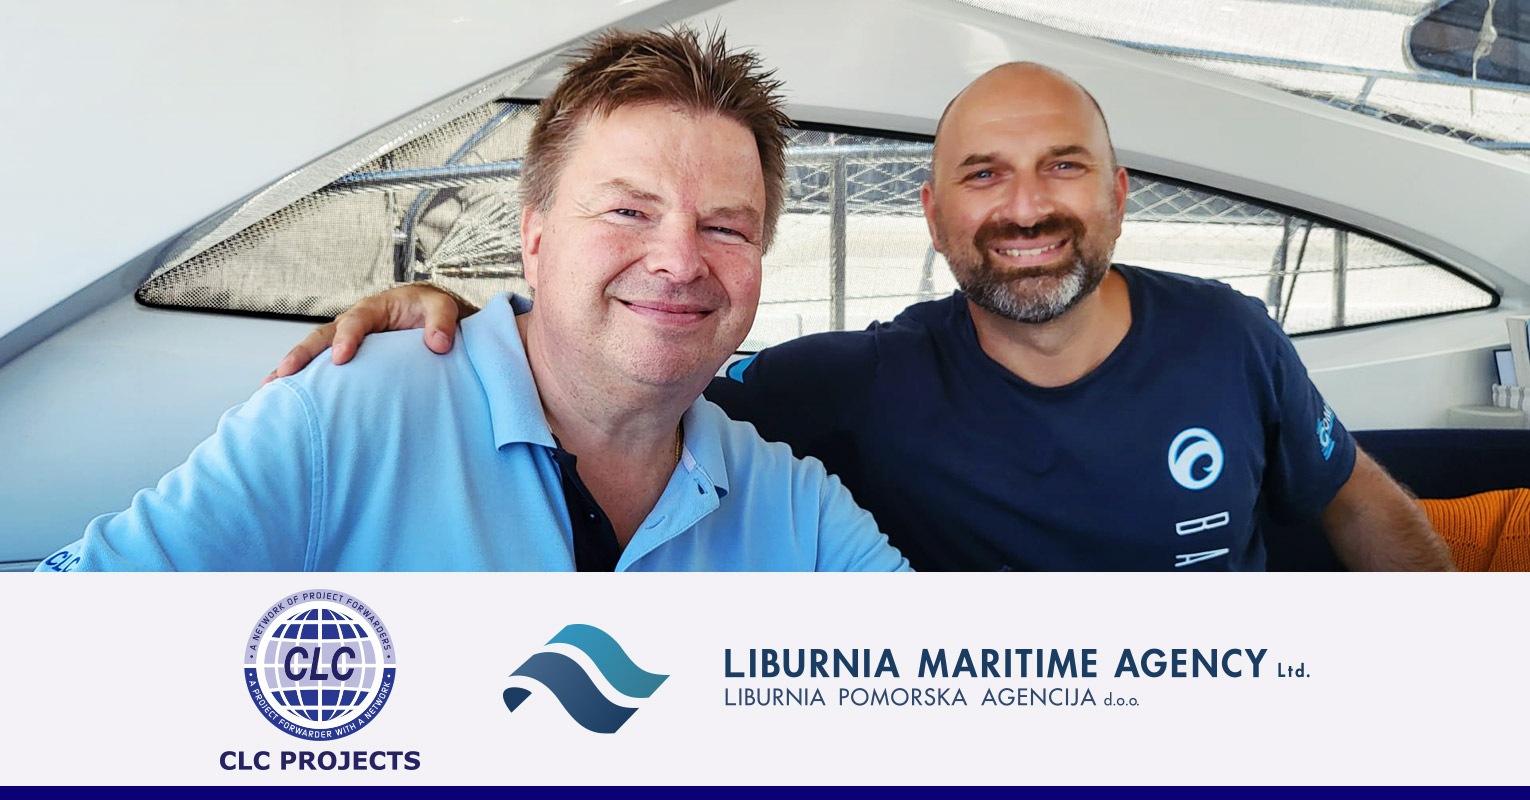 CLC Projects Chairman met with Marin Skufca, CEO of Liburnia Maritime Agency